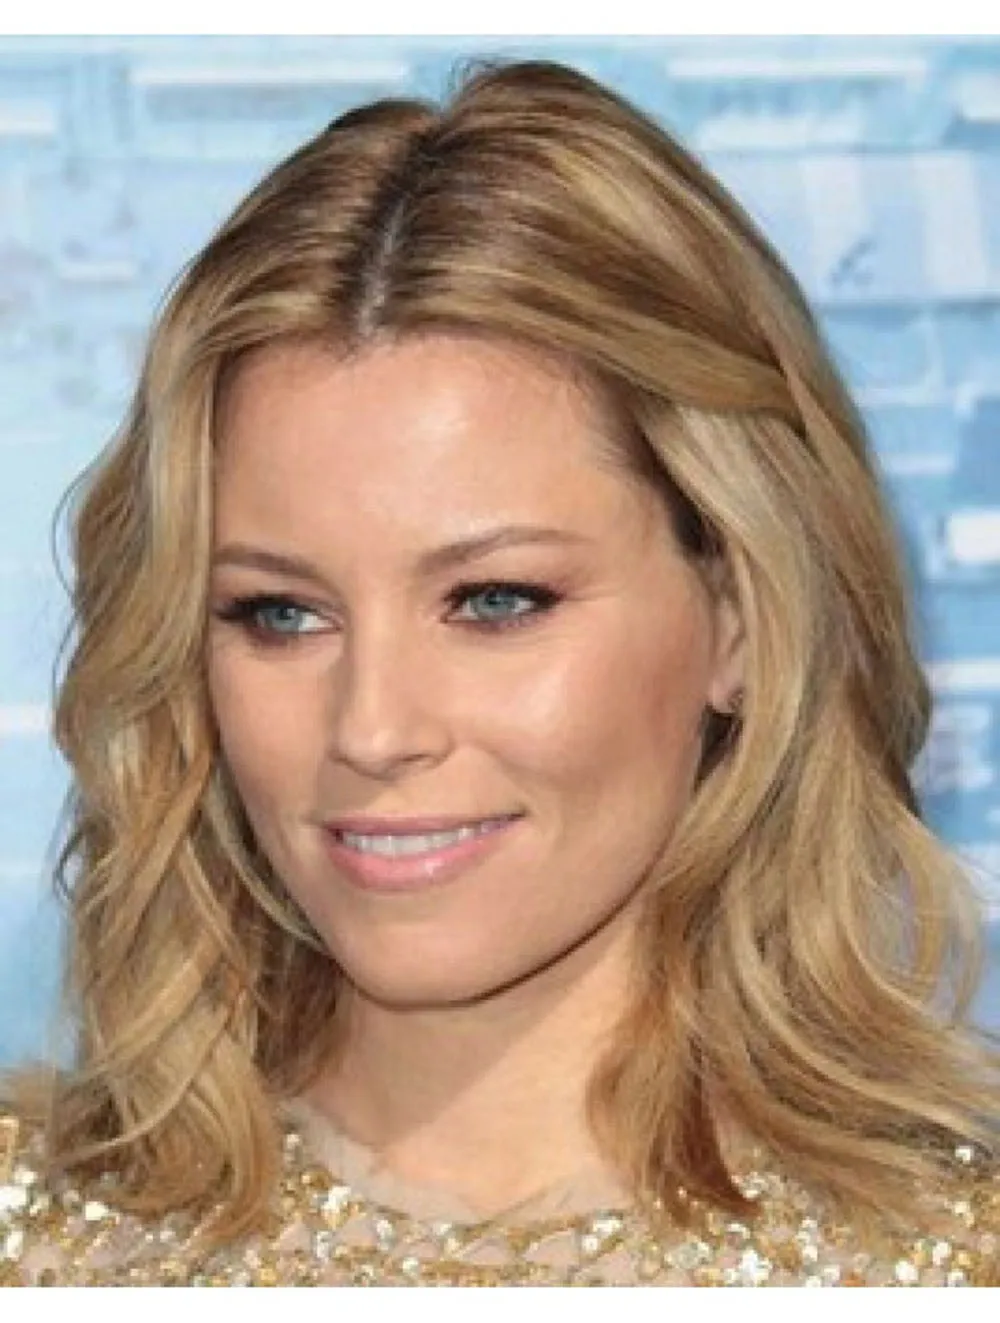 100% Human Hair Elizabeth Banks Medium Ombre Loose Wave Hairstyle Monofilament Top 13 * 4 Lace Front Full Wigs